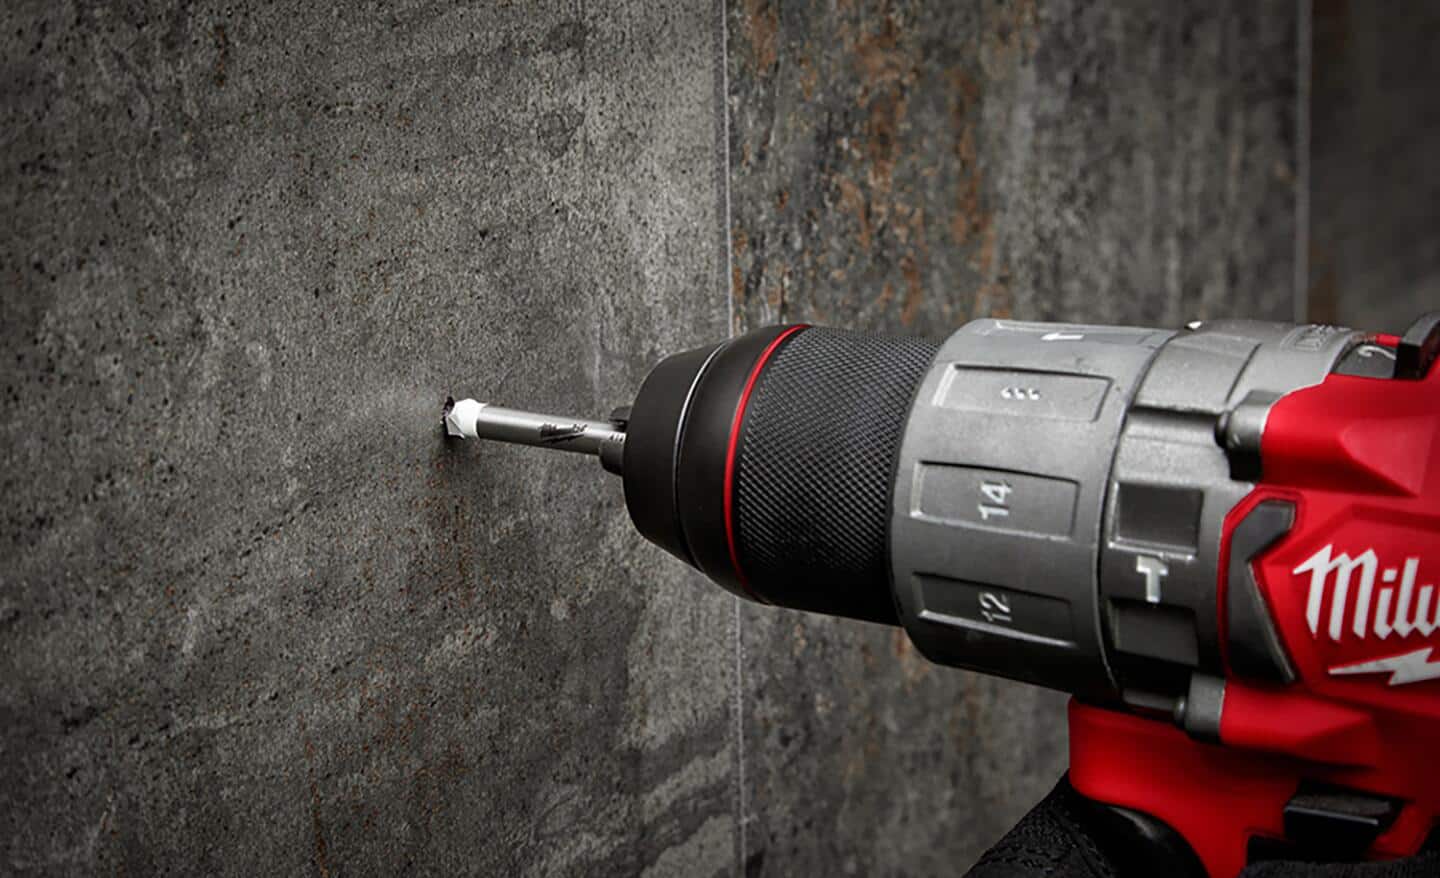 A red drill with a tile drill bit.